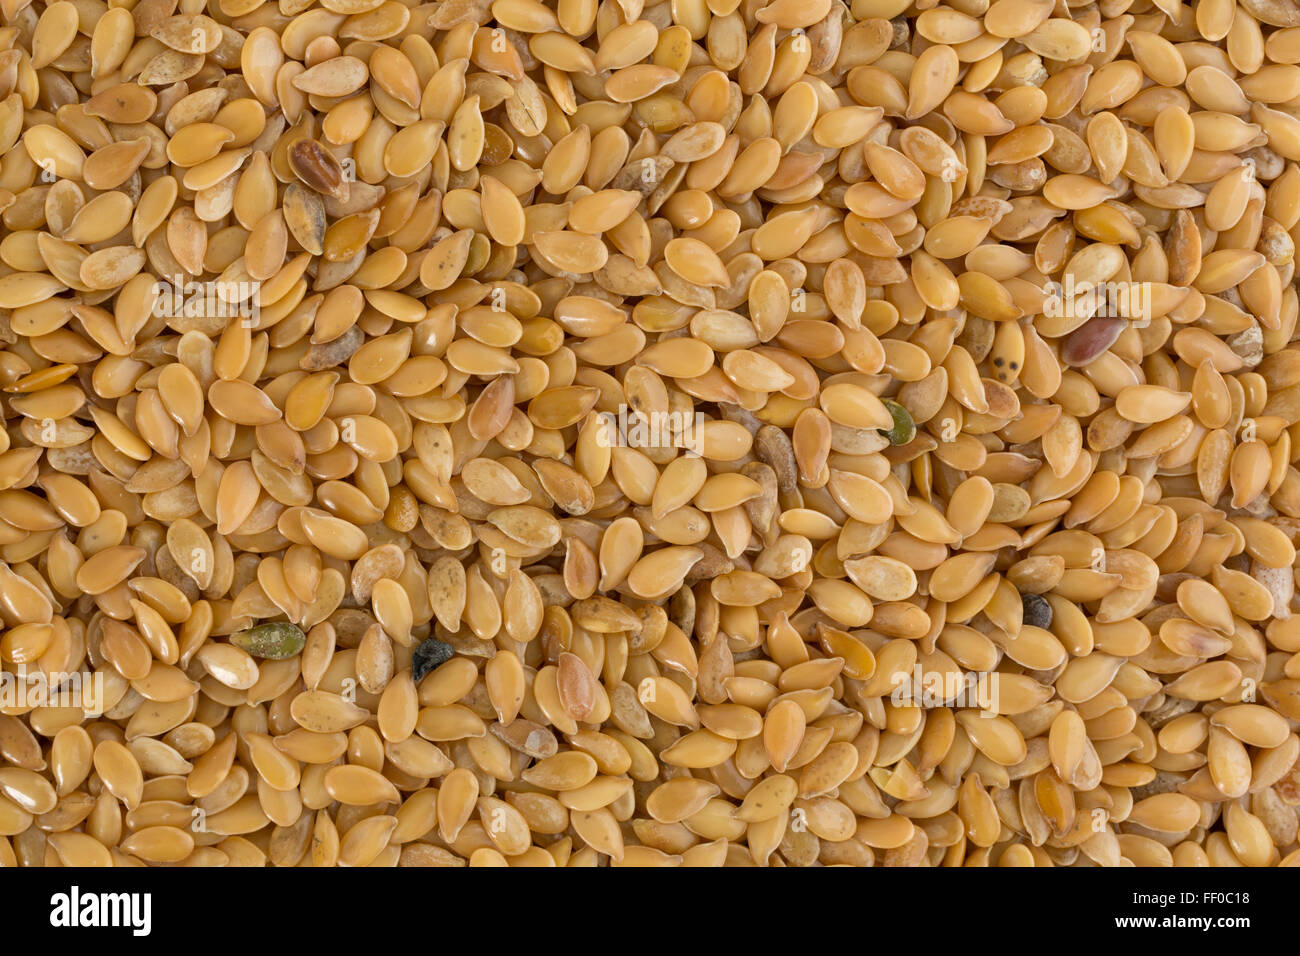 A close view of organic golden flaxseed illuminated with natural light. Stock Photo